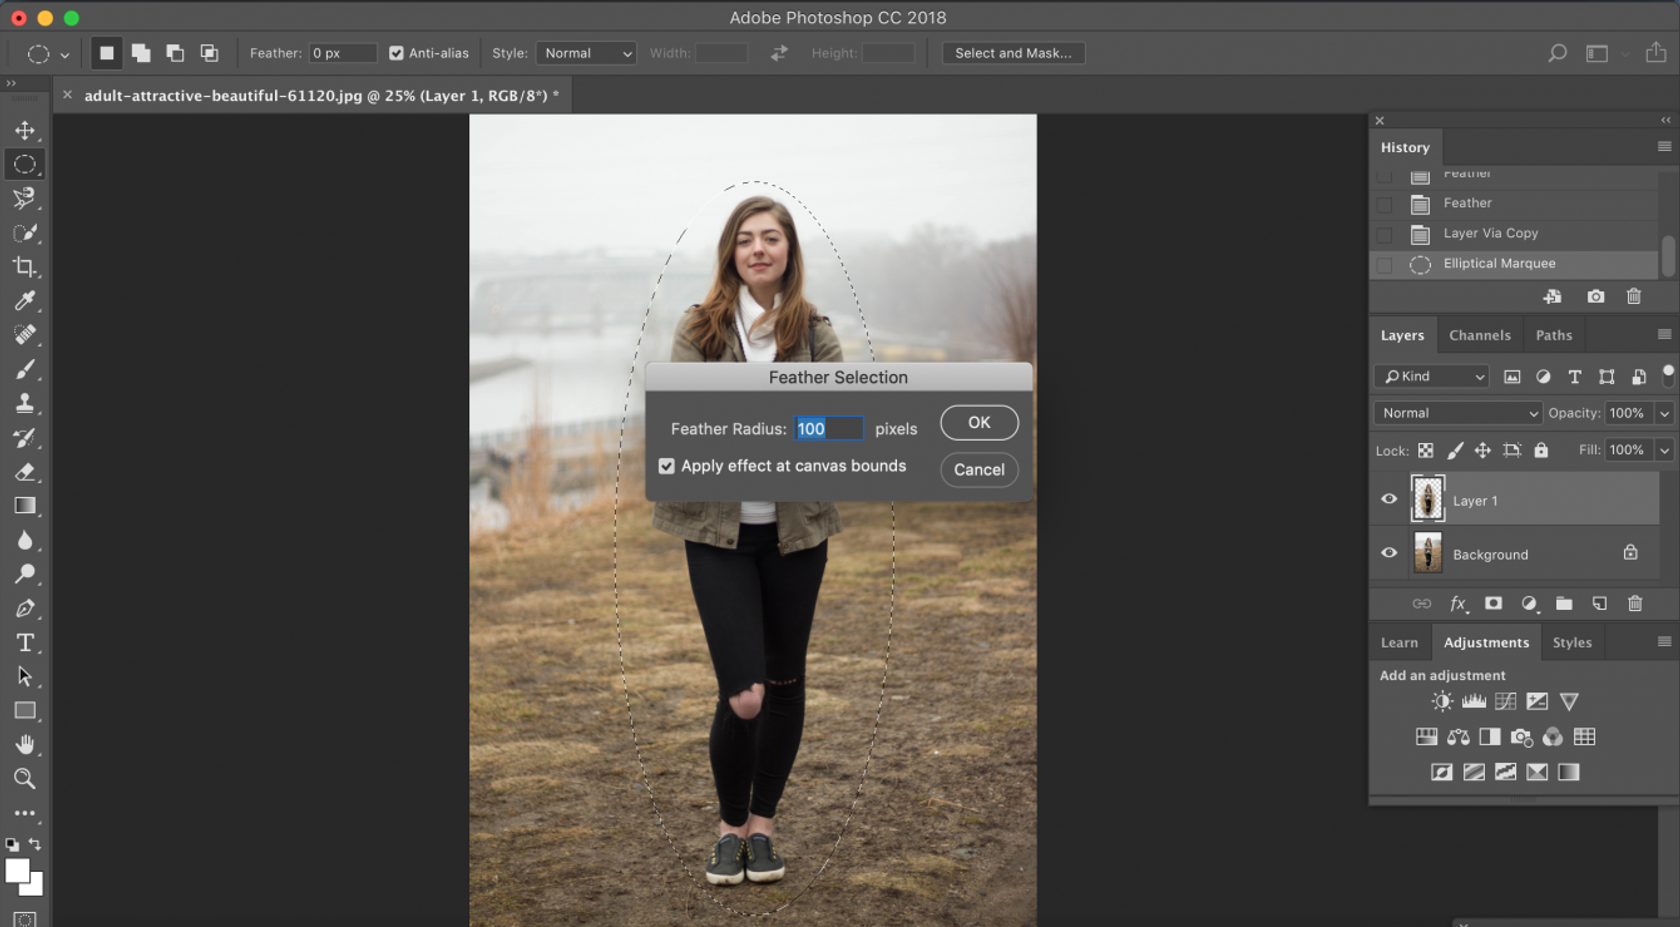 How to Smooth Edges in Photoshop: Photoshop Feather and Other Tools Image9